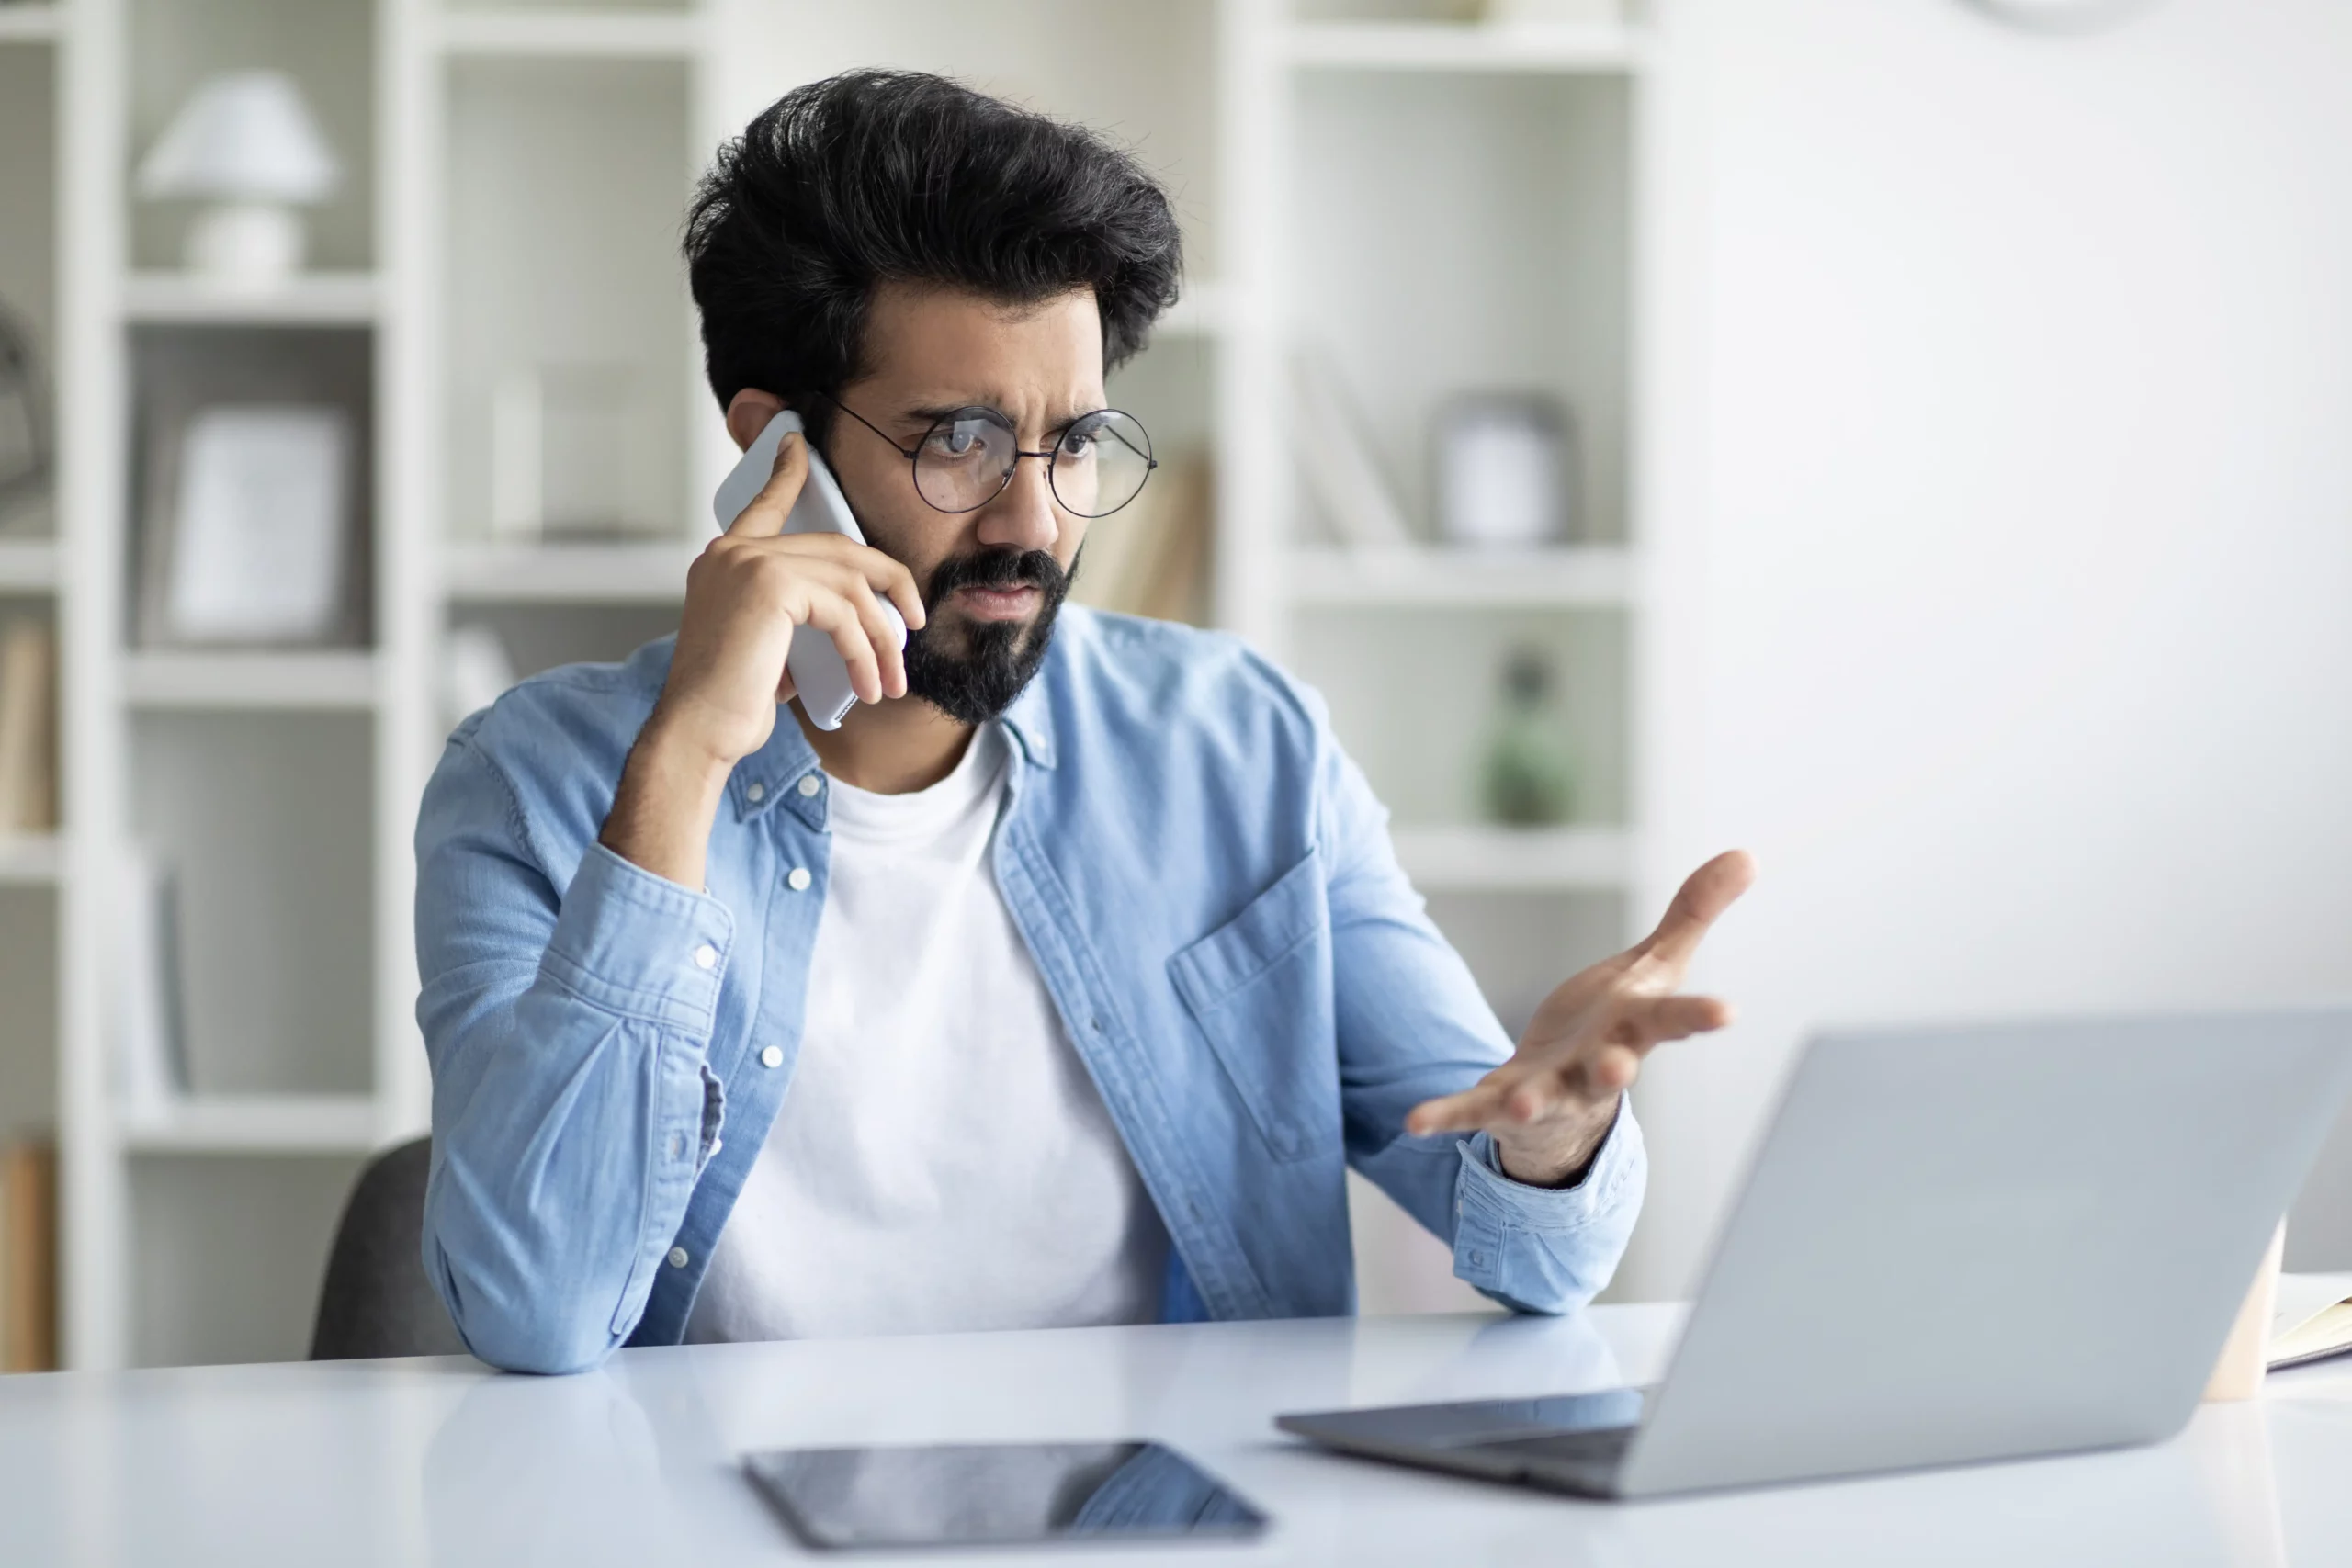 Should You Call First After an Interview ?